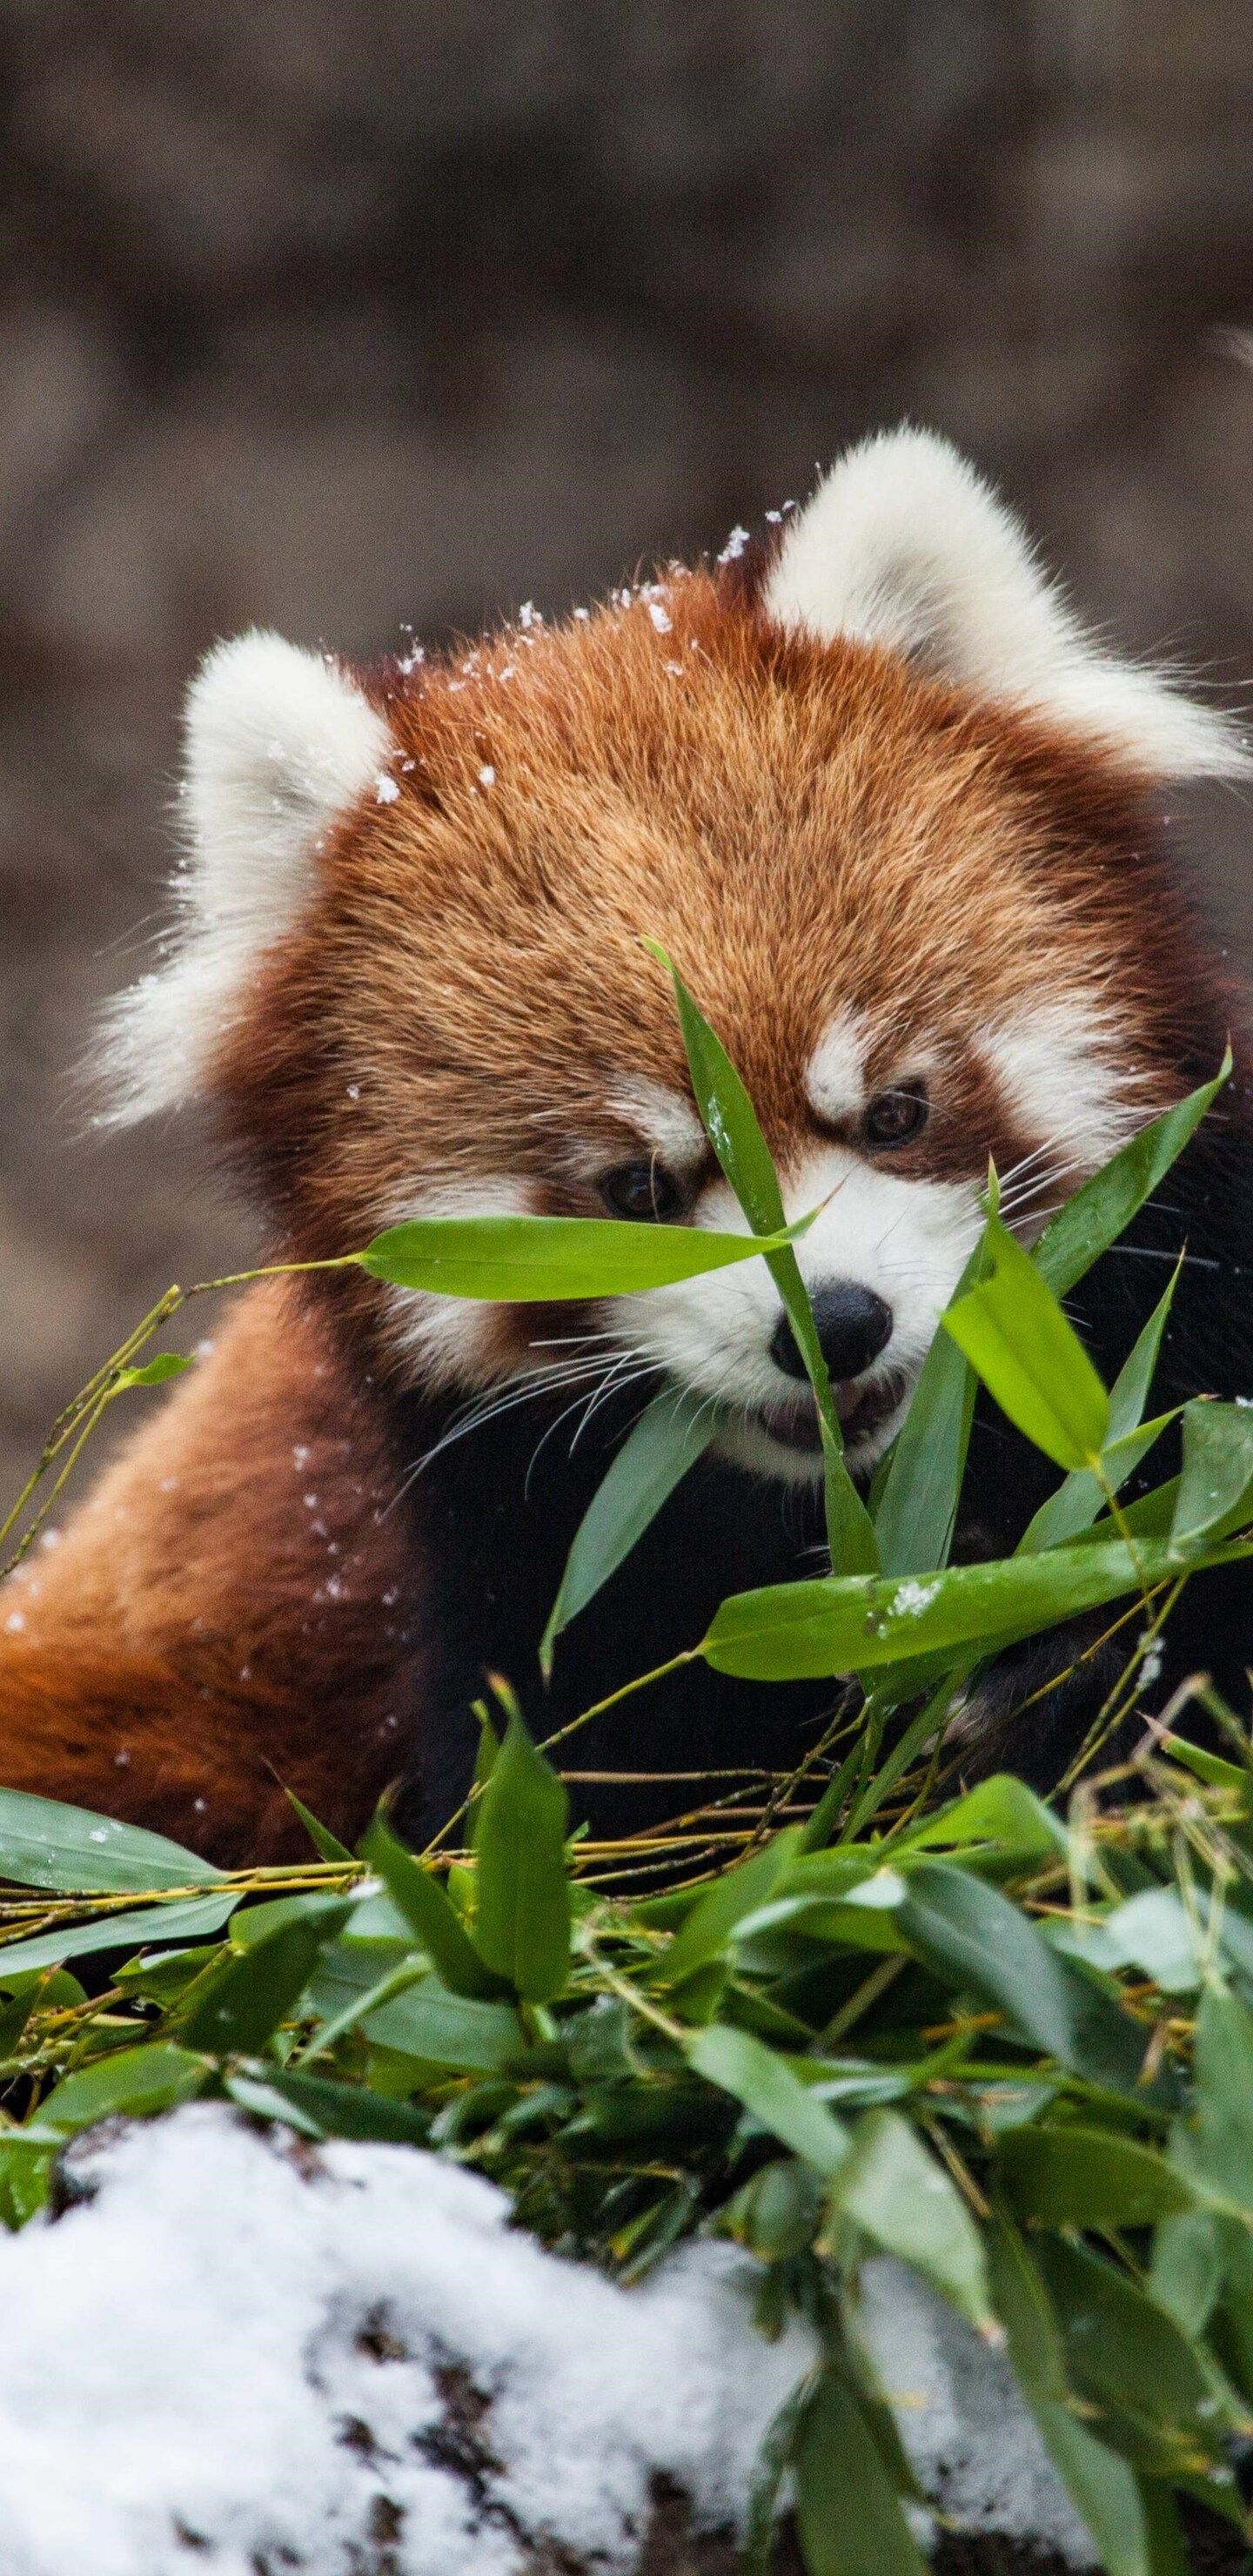 A red panda eating bamboo in the snow. - Panda